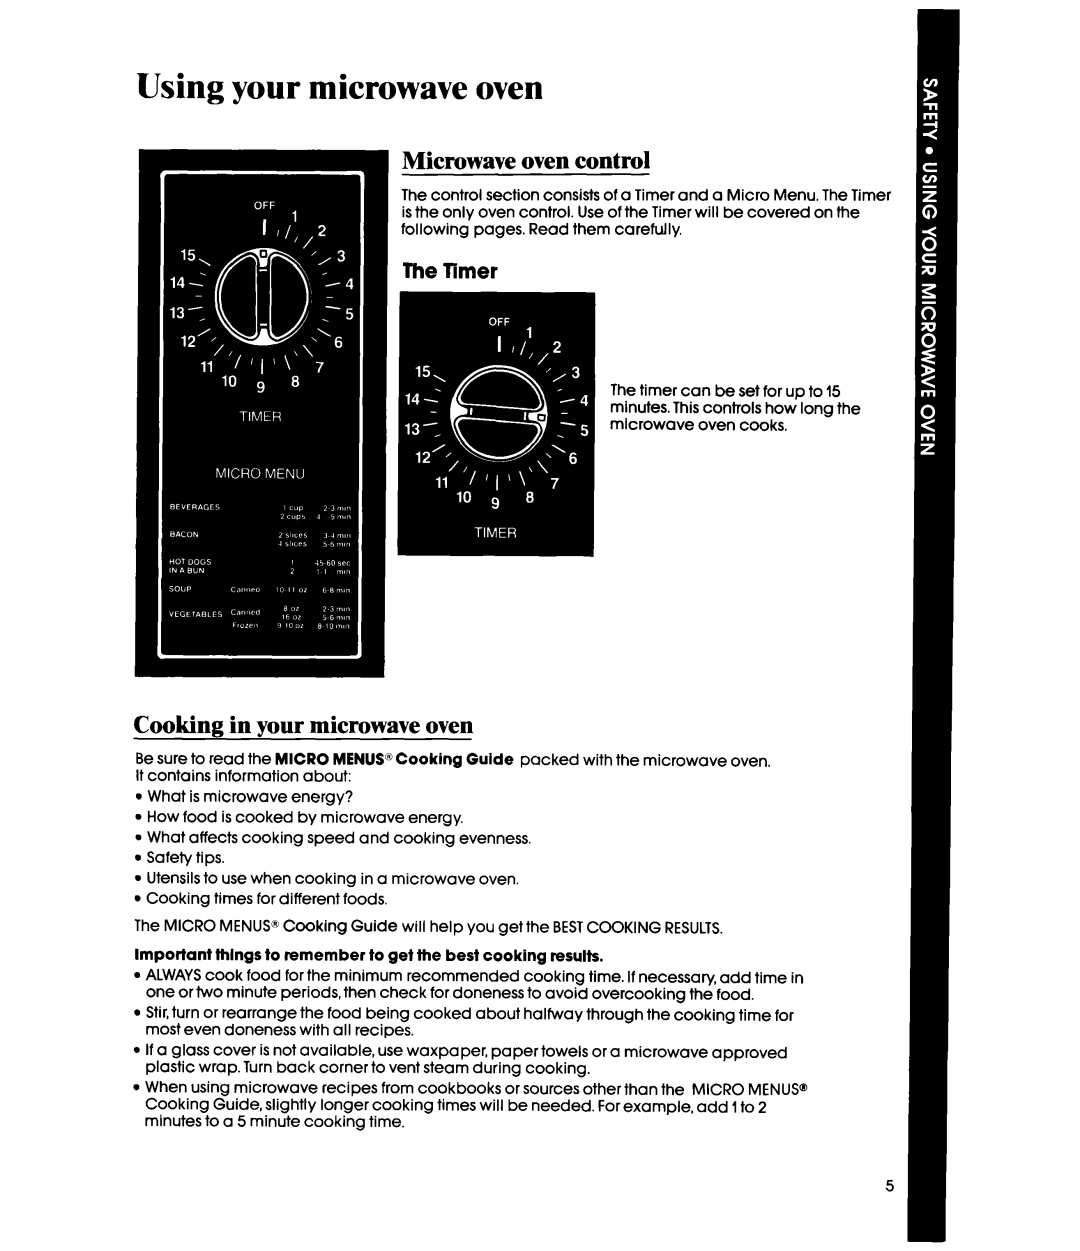 Whirlpool MWIOOOXS manual Using your microwave oven, Microwave oven control, Cooking in your microwave oven, The Timer 